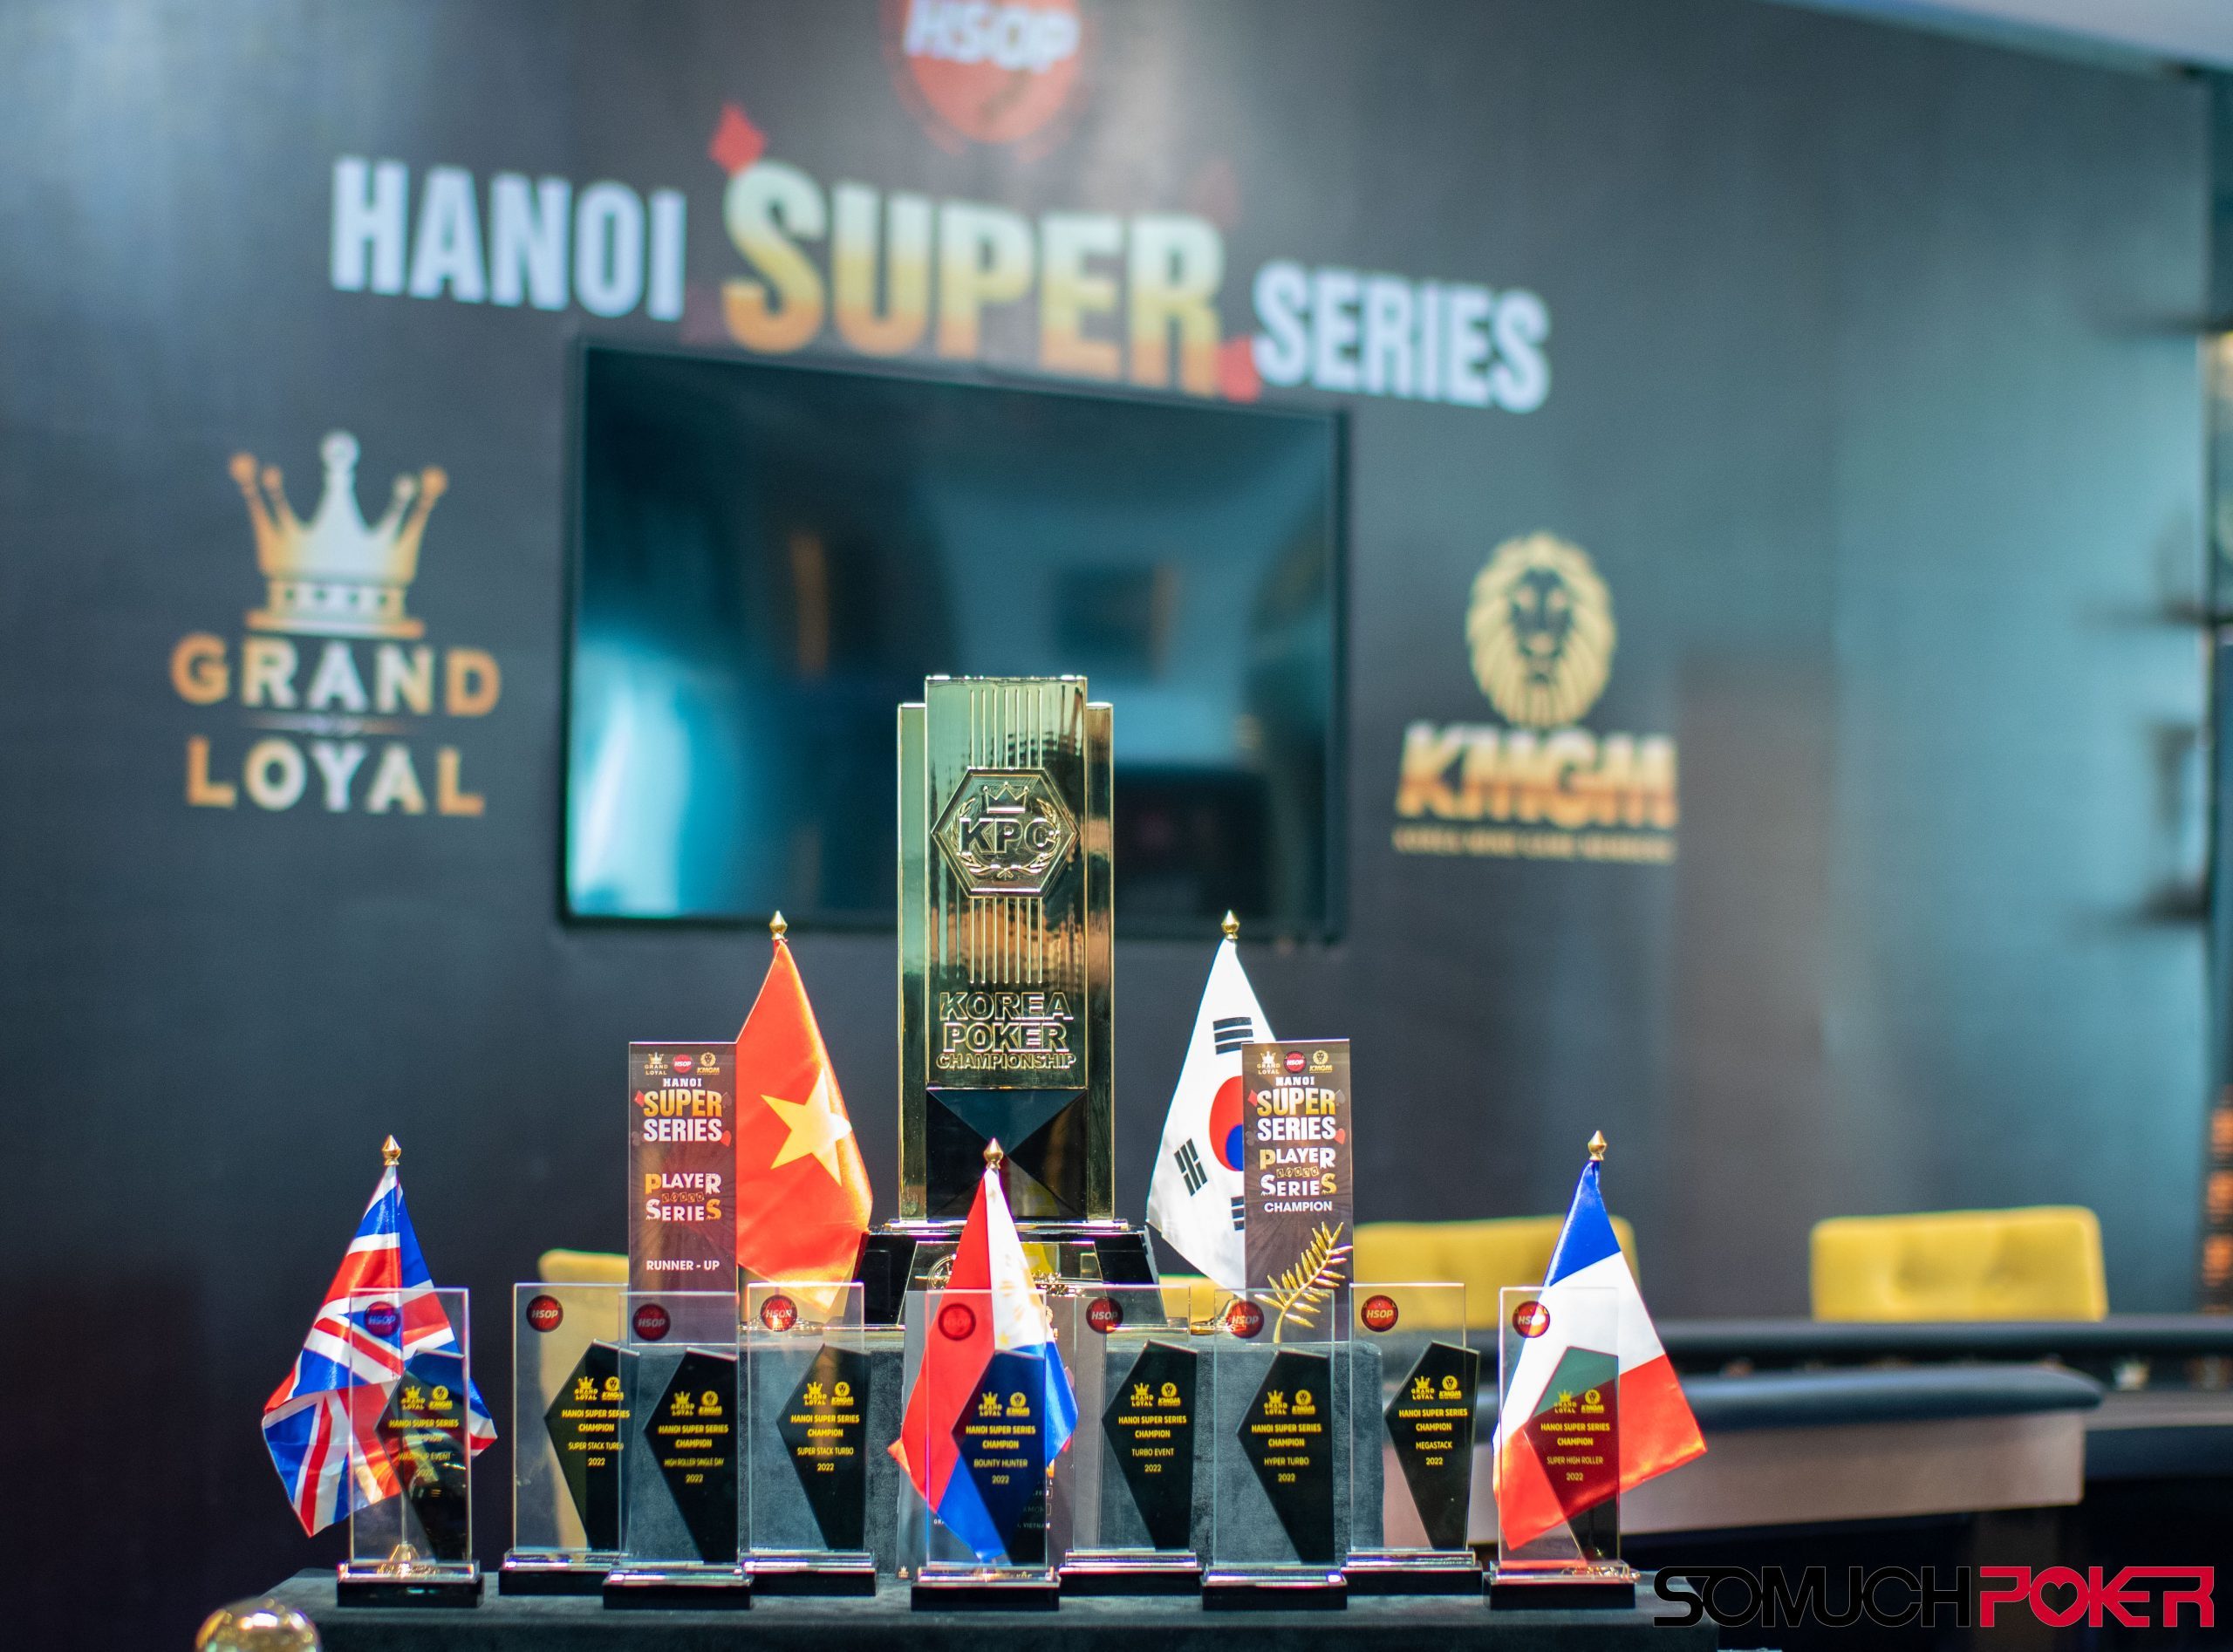 Three side events to conquer at Hanoi Super Series final day; Park Soo Rin wins last night's Turbo Event